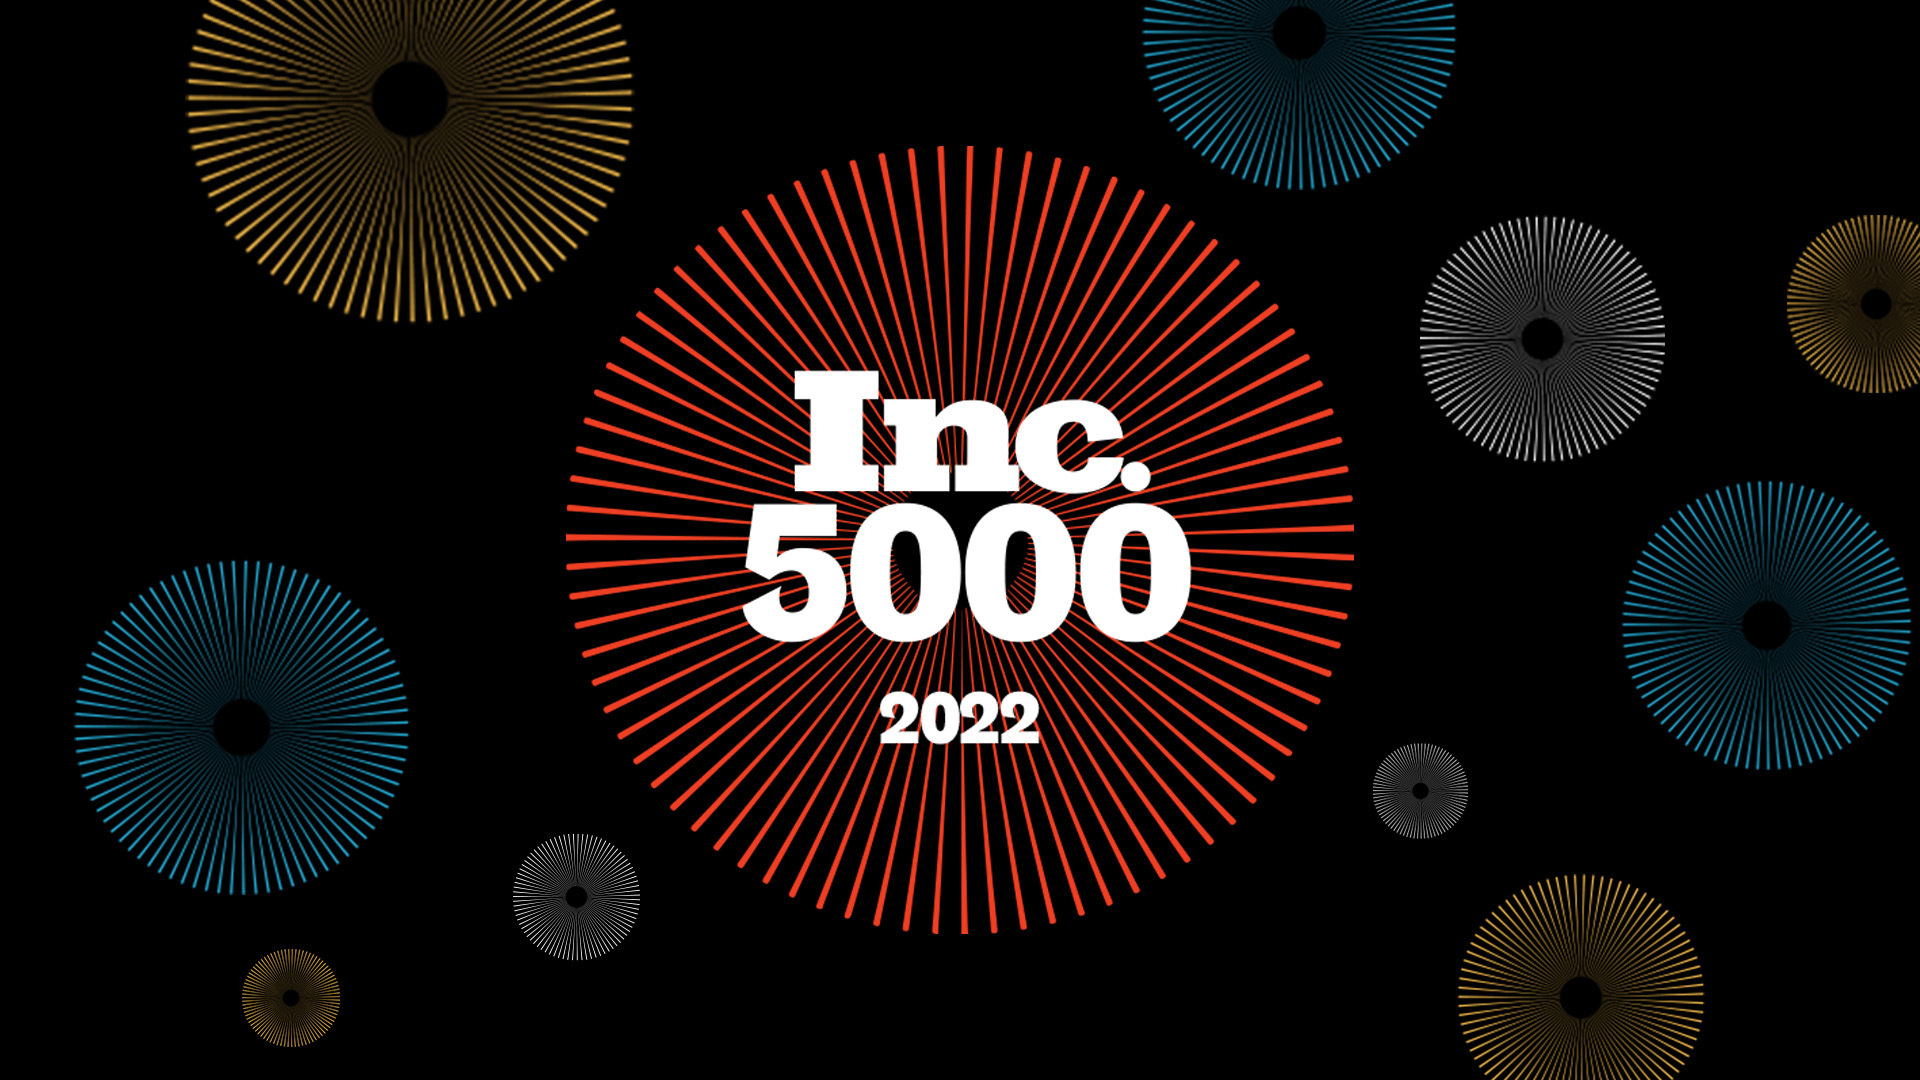 Endurance IT Services Makes the Inc. 5000 List of America’s Fastest Growing Companies